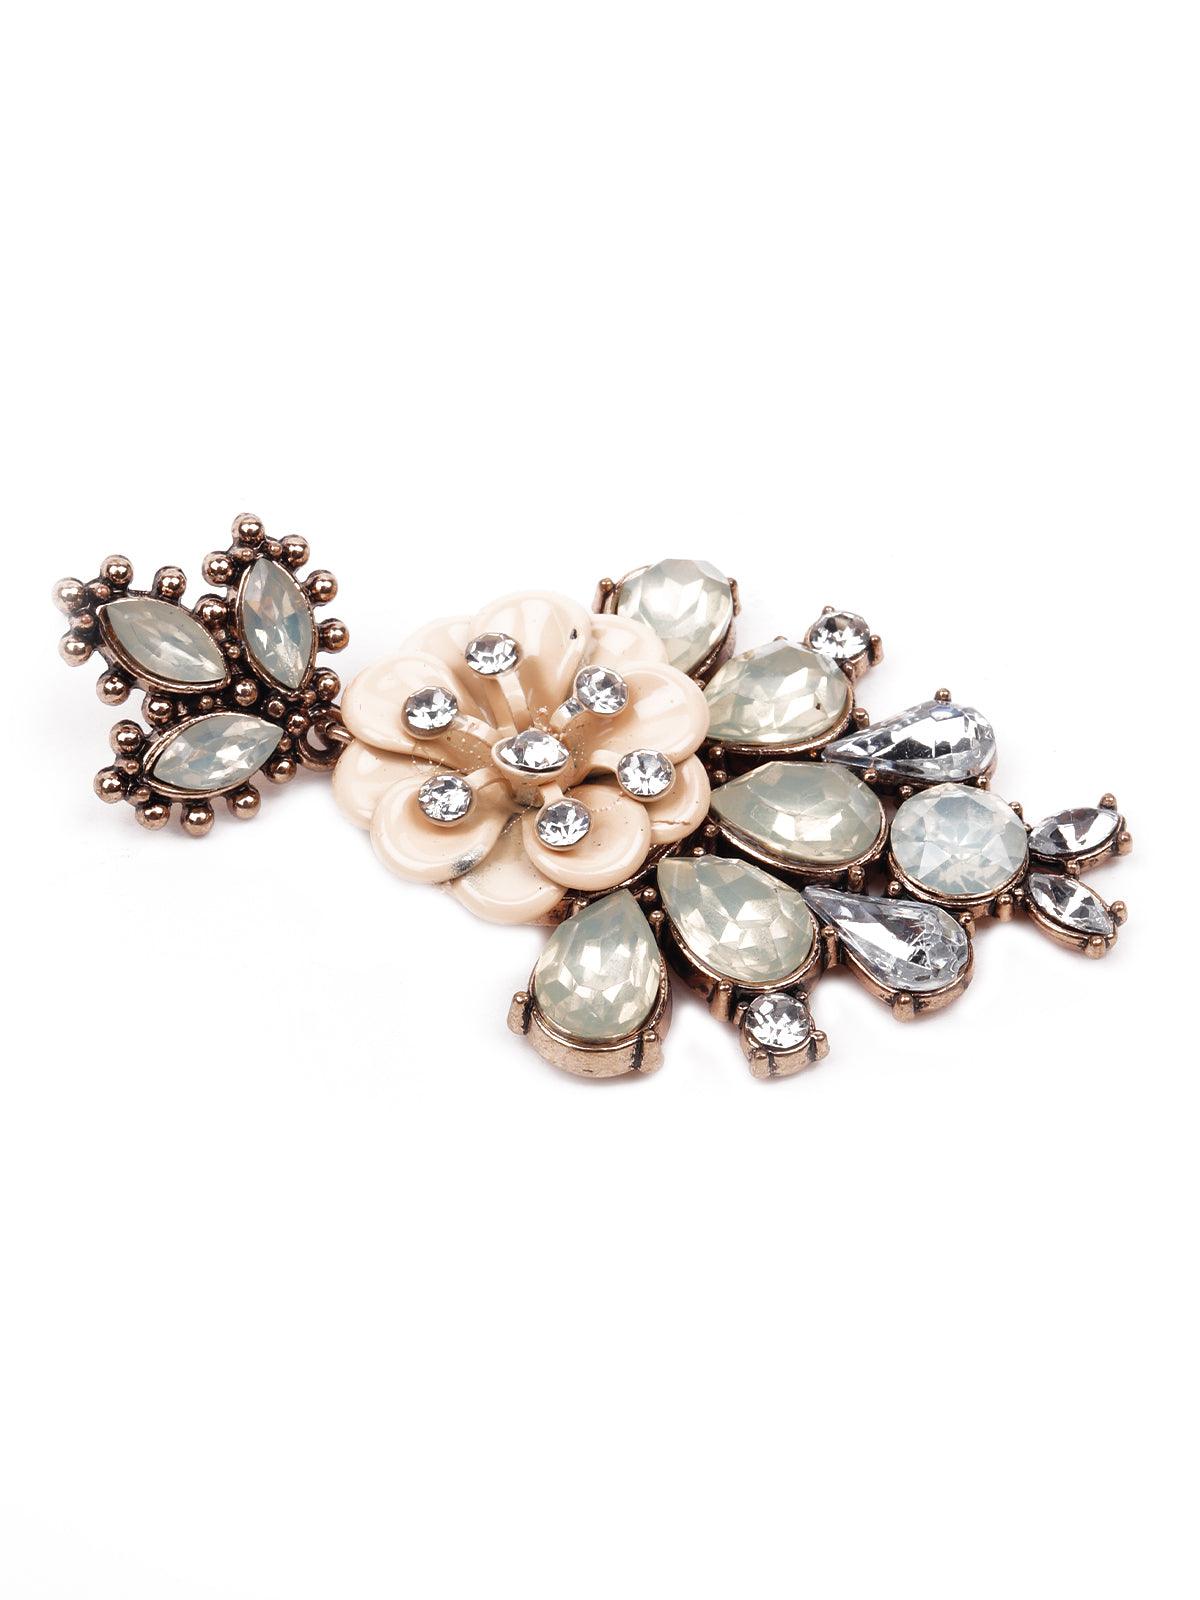 Women's Exquisite Beautiful Floral Beaded Statement Earrings - Odette